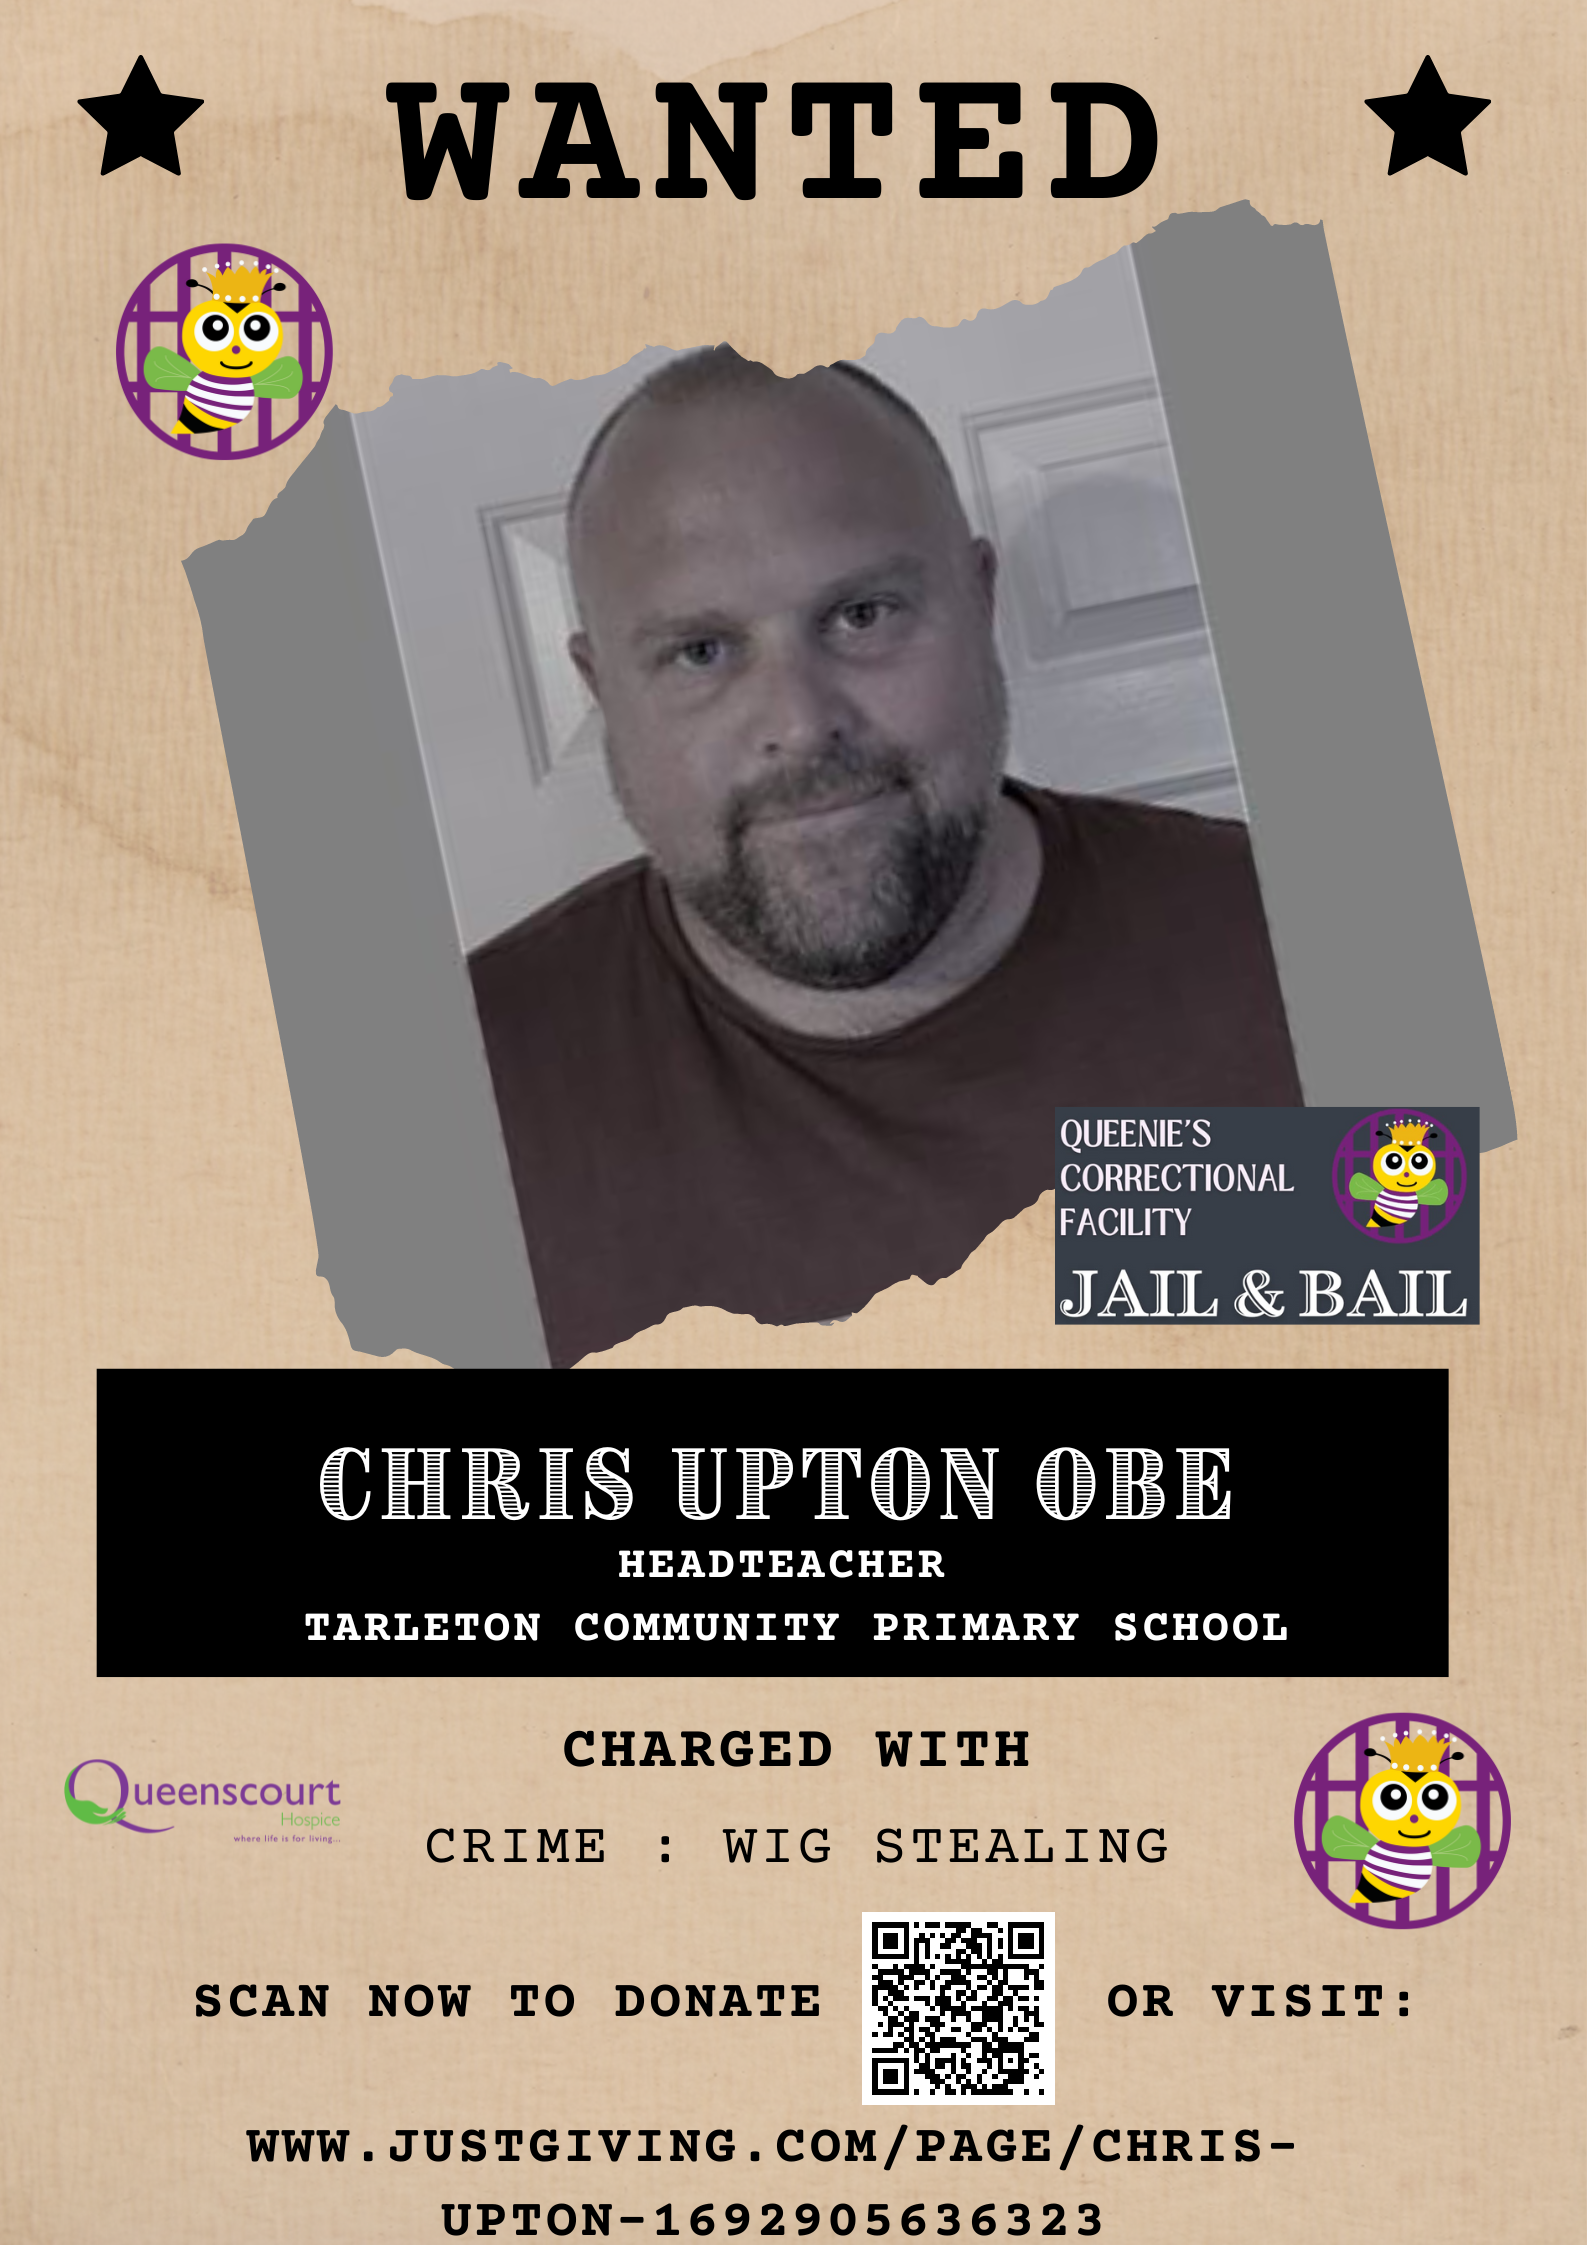 Chris Upton OBE, the headteacher at Tarleton County Primary School in Lancashire, has been ‘arrested’ as he takes part in the Jail and Bail fundraiser for Queenscourt Hospice